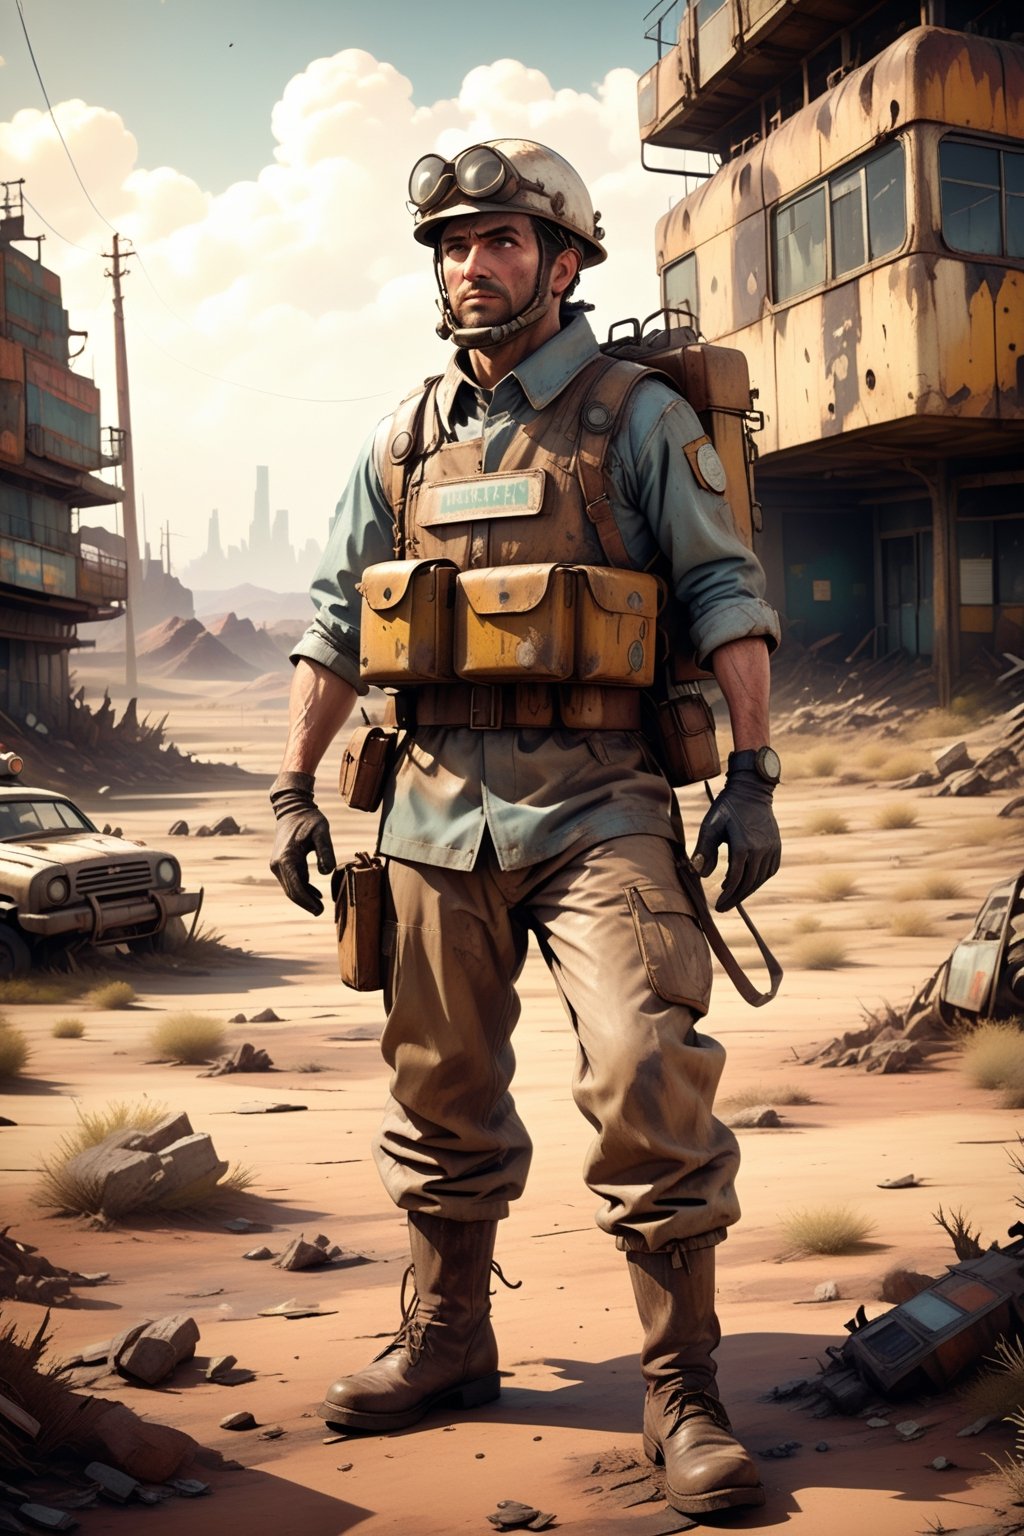 (((masterpiece))),best quality, illustration, Picture a rugged post-apocalyptic survivor, reminiscent of a 1950's milkman, navigating a harsh wasteland. Dressed in a modified milkman uniform, complete with a utility belt and protective gear, this warrior carries hope and determination in a world gone awry, blending vintage charm with survival instincts, highly detailed